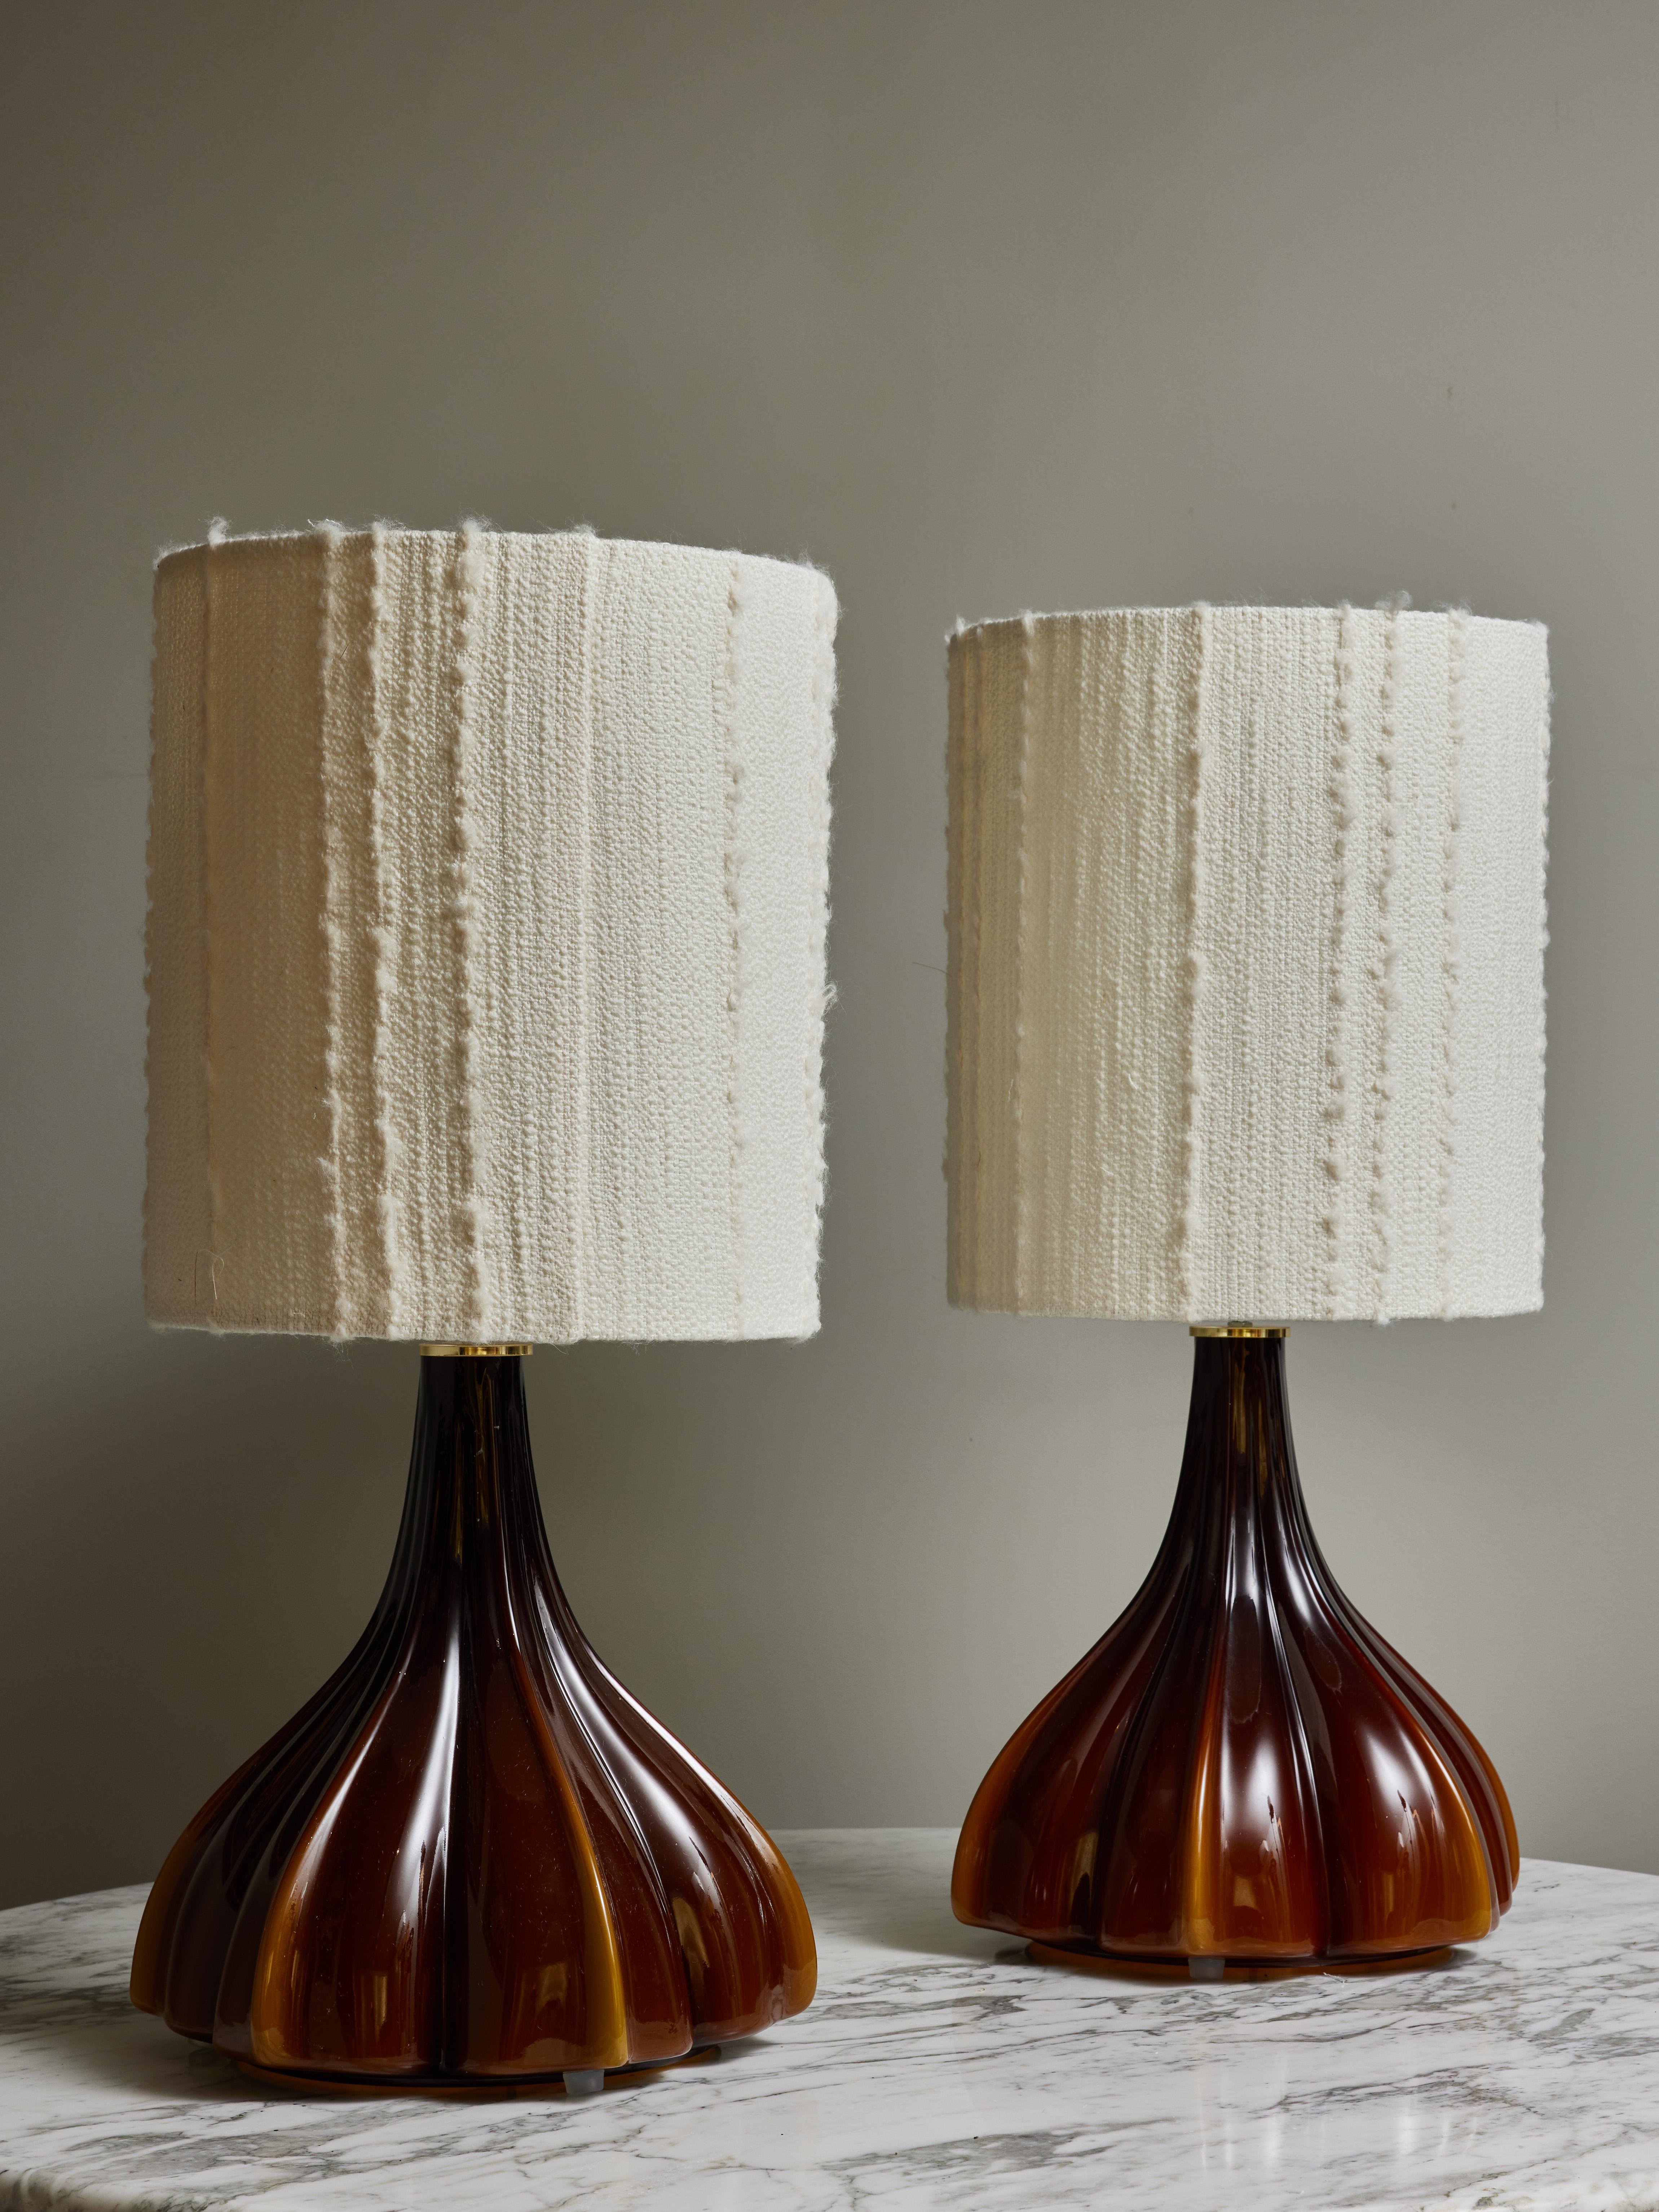 Pair of glass table lamps made by Peill & Putzler in the 1970s.

These are made of a single molded glass flower shaped piece, tinted in brown with lighter beige hues. One source of light under the shade and one inside the glass.

Peill & Putzler